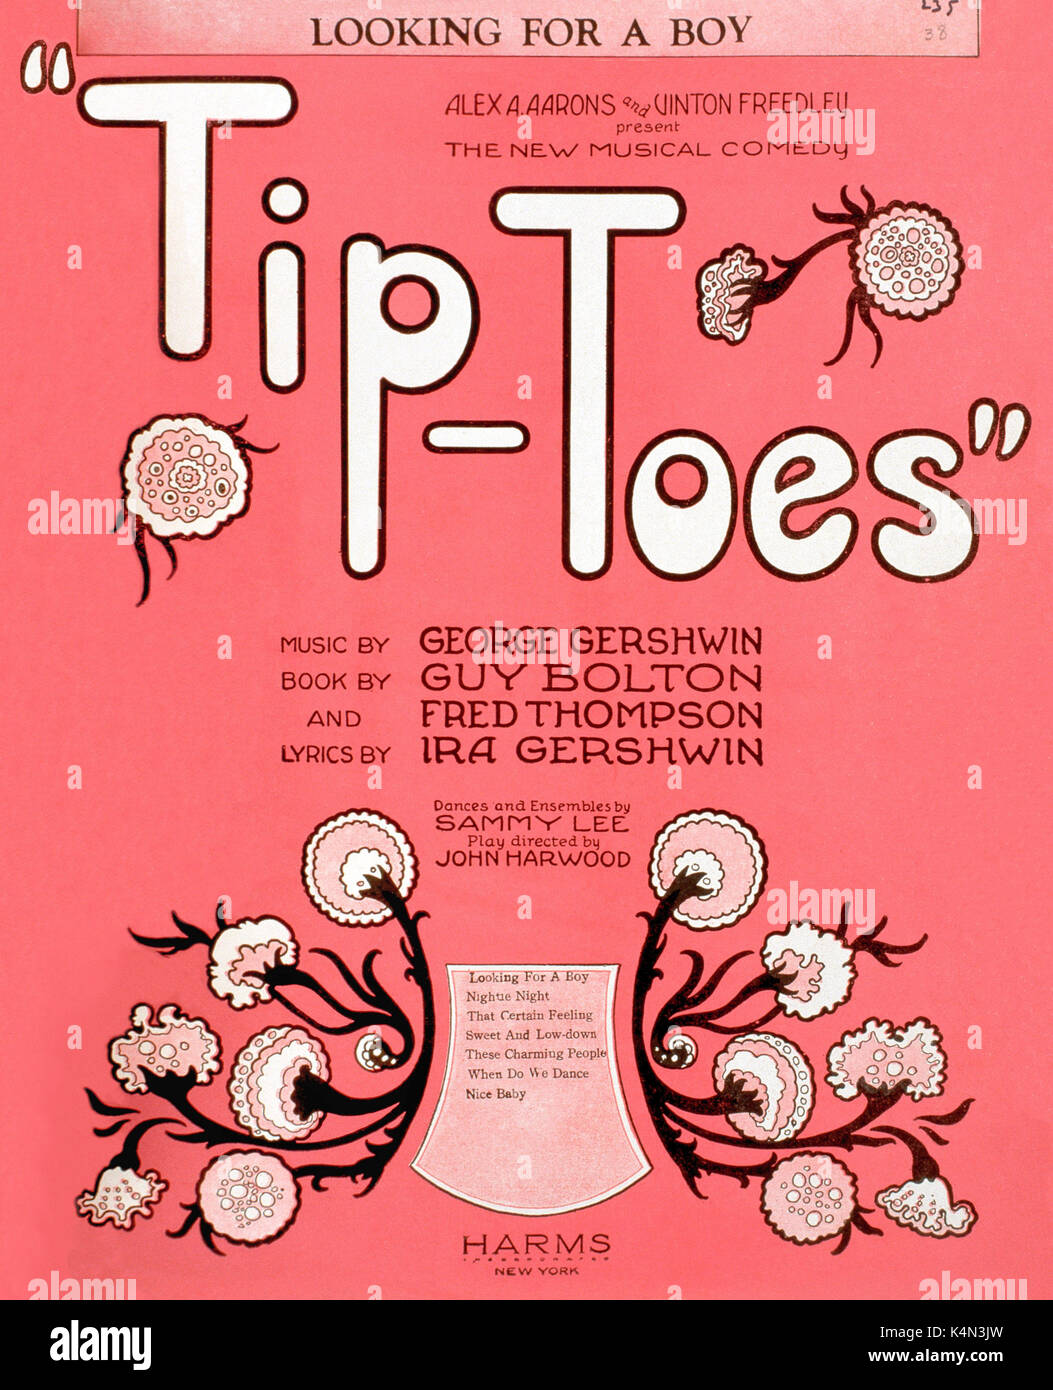 George Gershwin's 'Tip Toes' score cover, musical comedy: Music by George Gershwin; Lyrics by Ira Gershwin; from book by  Fred Thompson and Guy Bolton.  American composer and pianist (1898-1937). Stock Photo